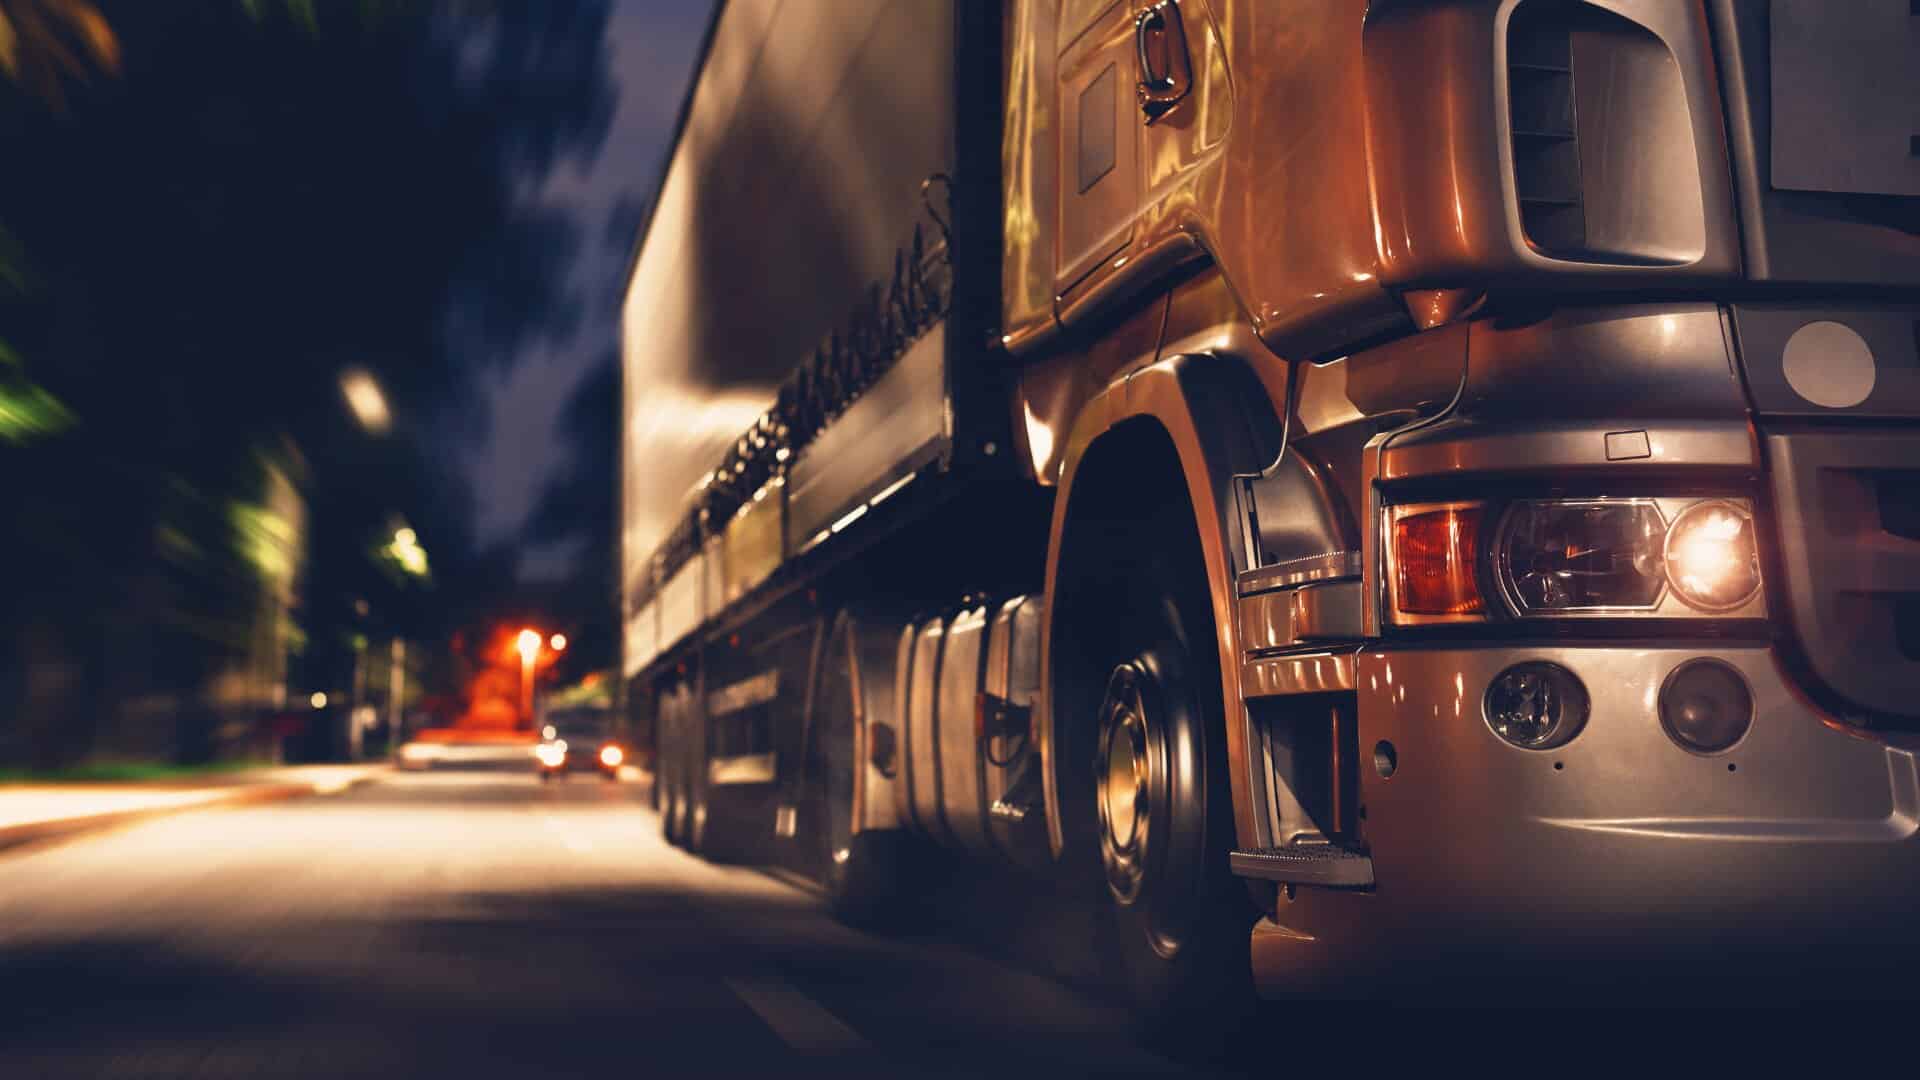 HD truck image for ecommercecargo